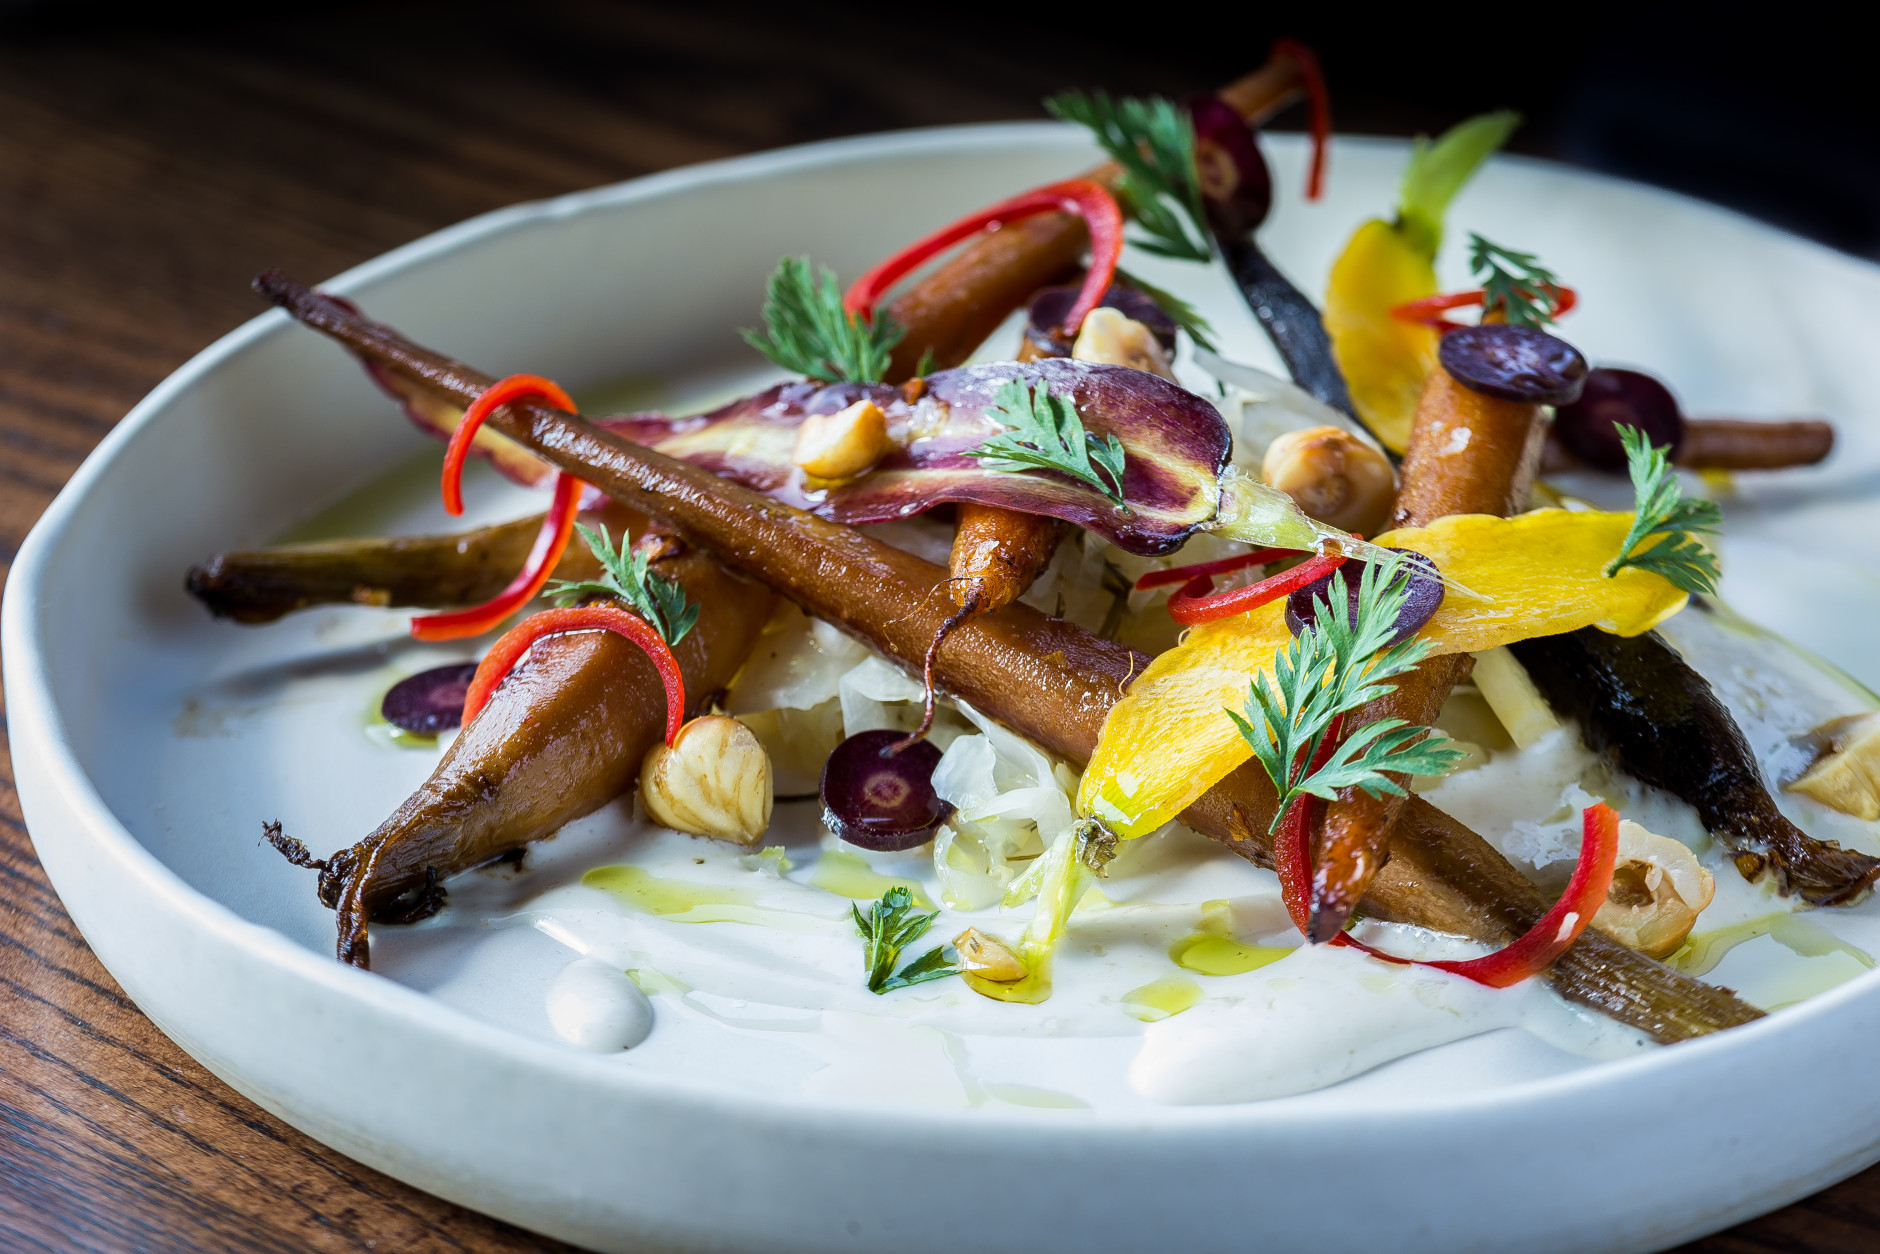 At D.C.'s new restaurant, Hazel, the focus is on duck. But that doesn't mean you can't find vegetables on the menu. Pictured: barbecued carrots with fennel kraut, hazelnuts and buttermilk. (Courtesy Rey Lopez)